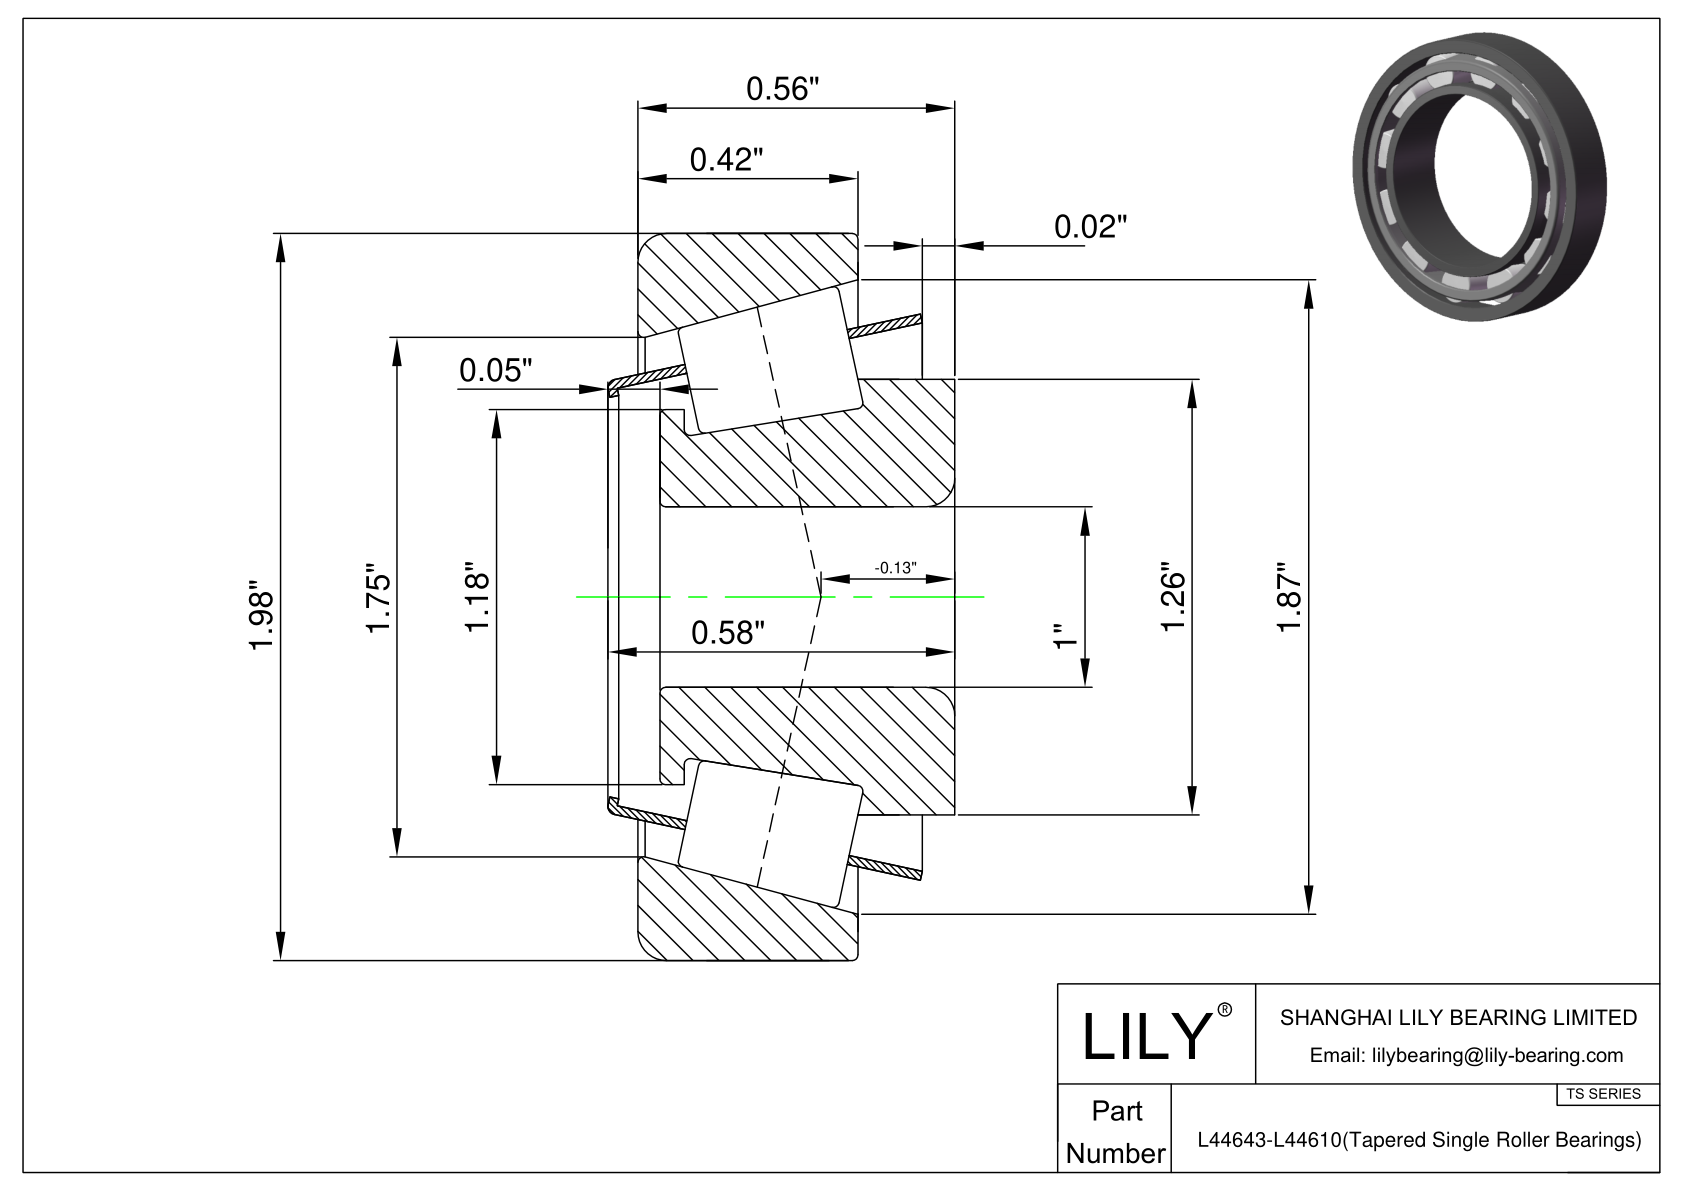 L44643-L44610 TS (Tapered Single Roller Bearings) (Imperial) cad drawing